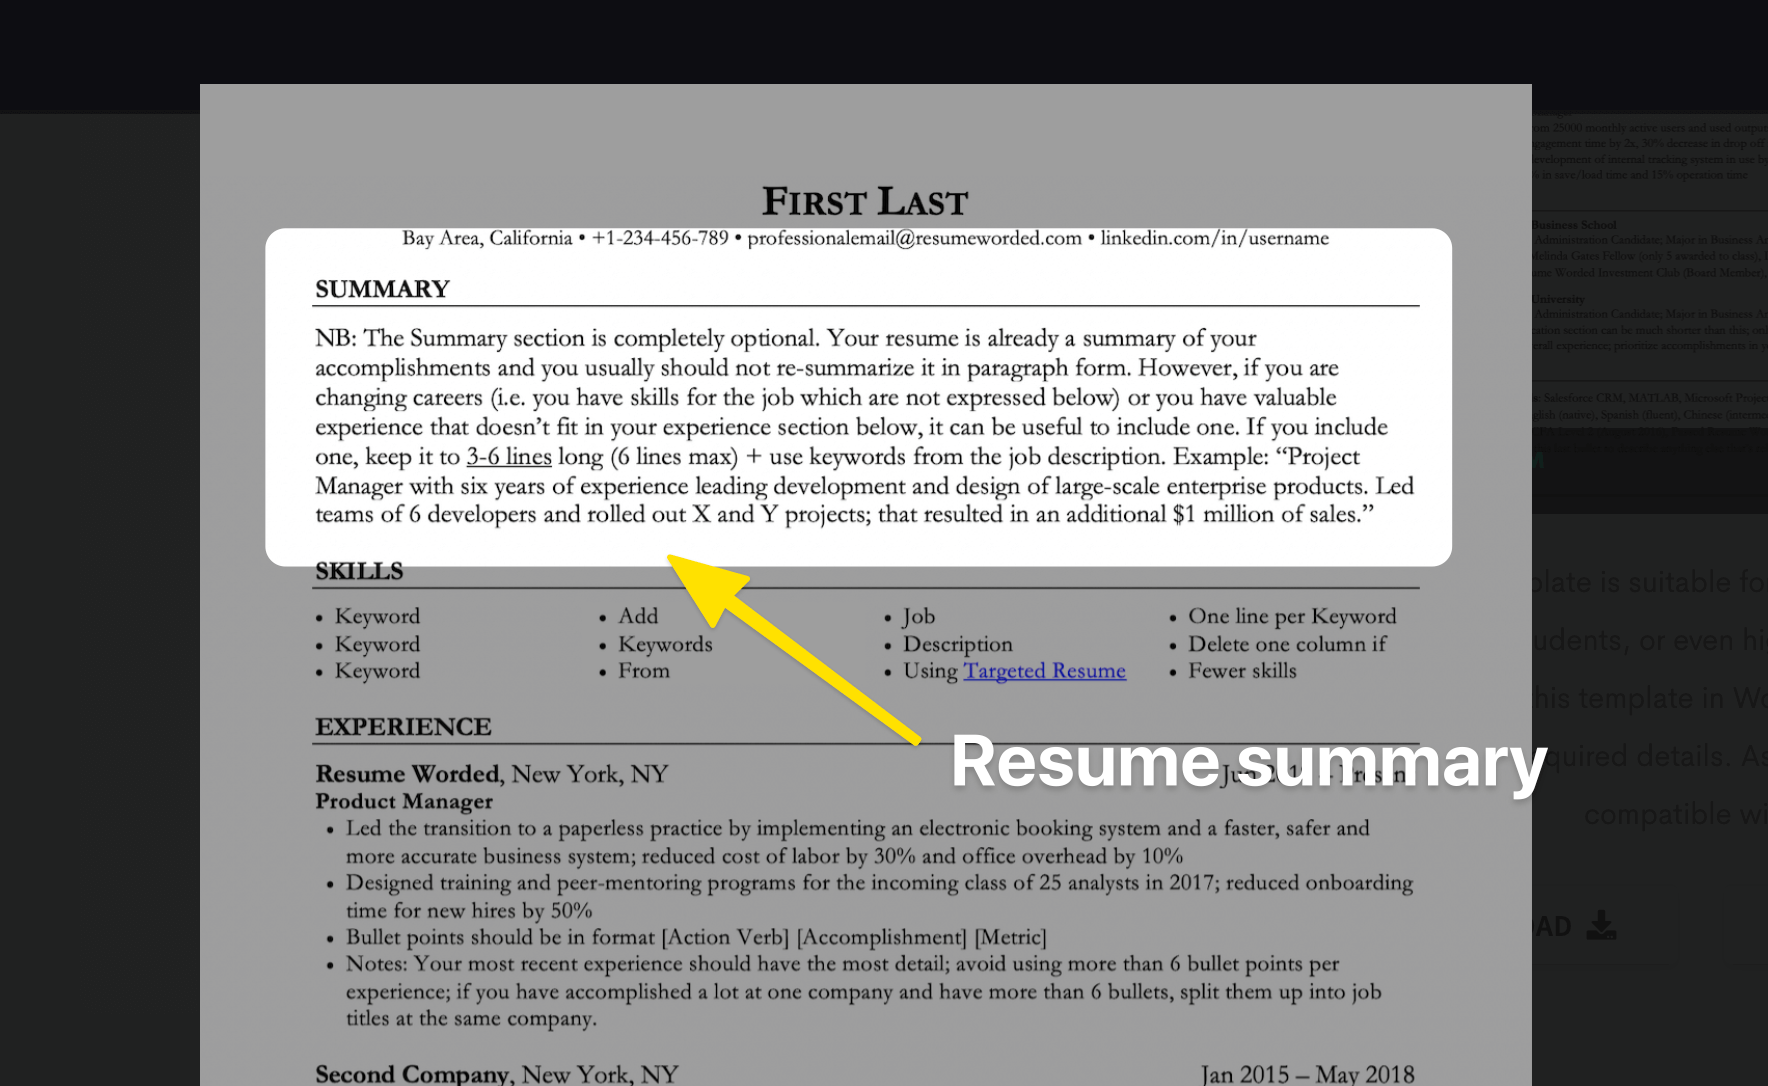 10 Laws Of resume